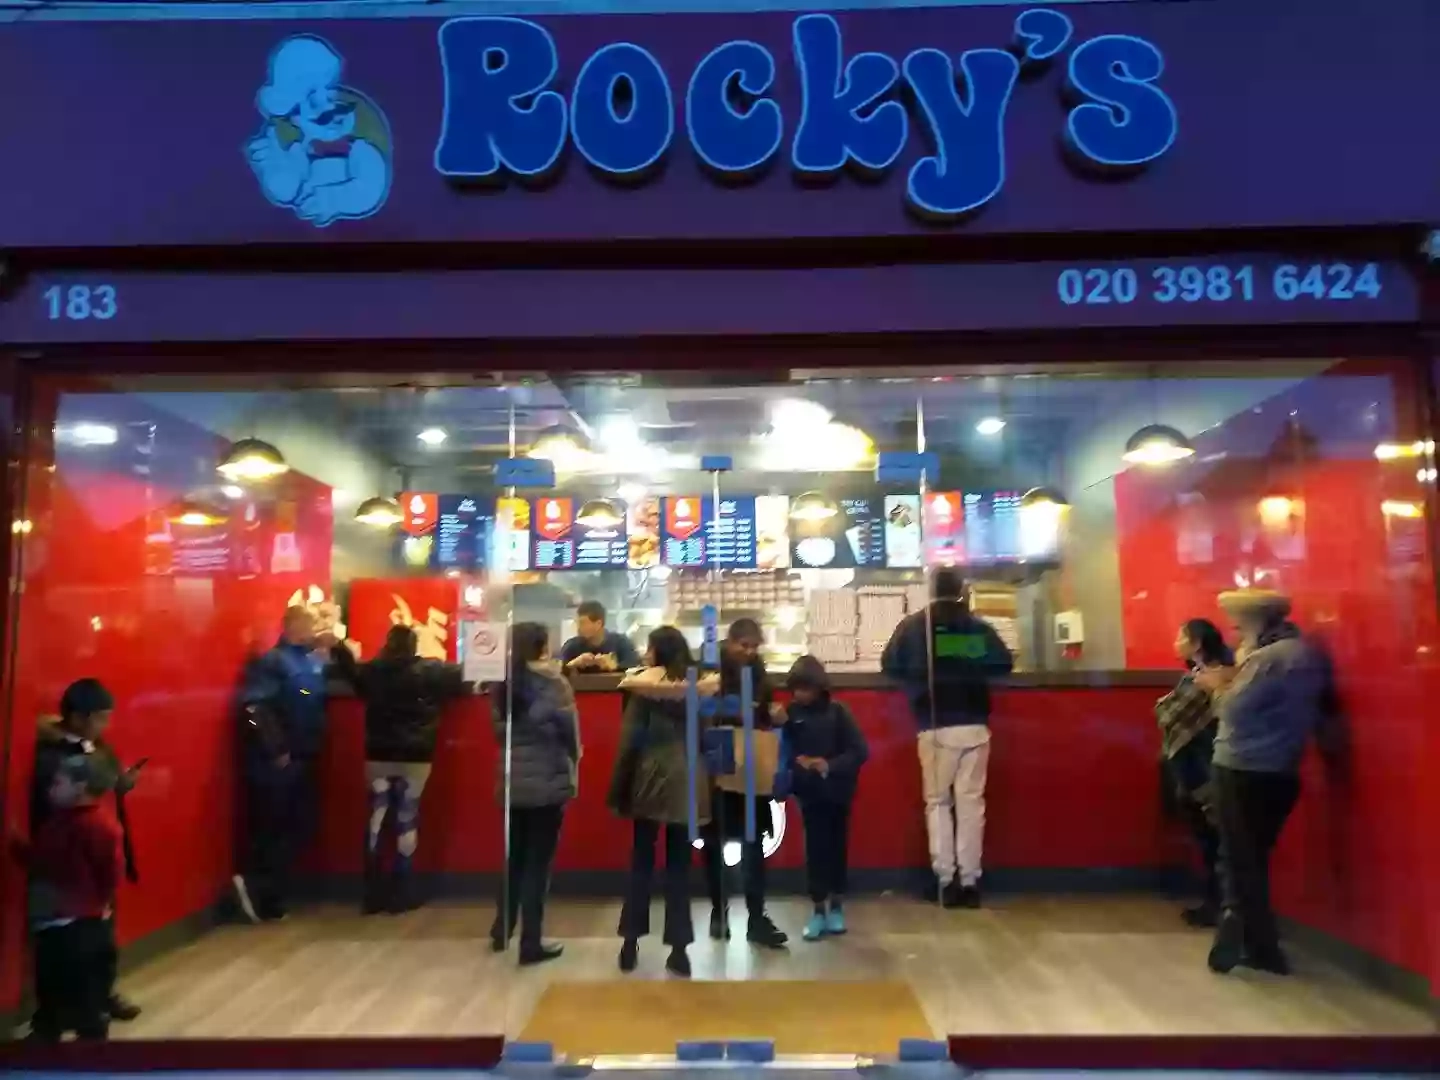 Rockys Southall - Lady Margaret Road, Pizza Takeaway, Fast Food Southall & Greenford